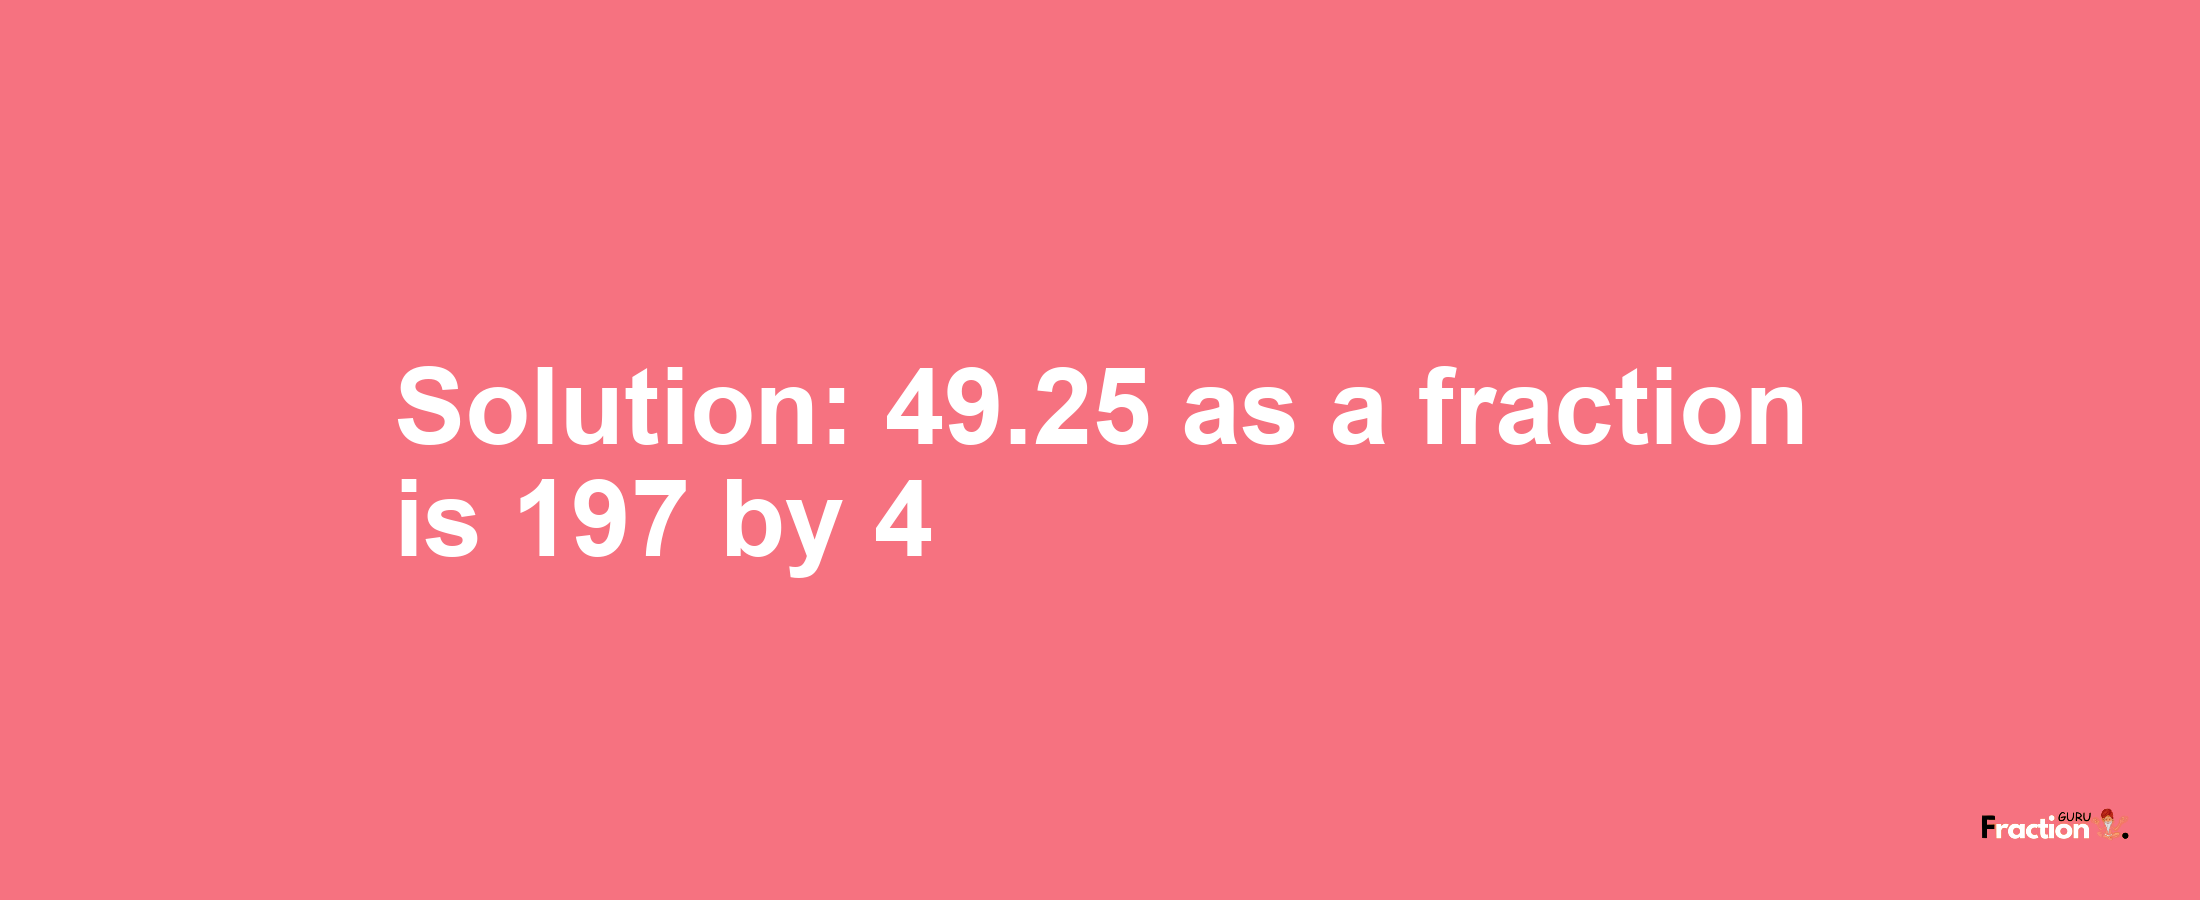 Solution:49.25 as a fraction is 197/4